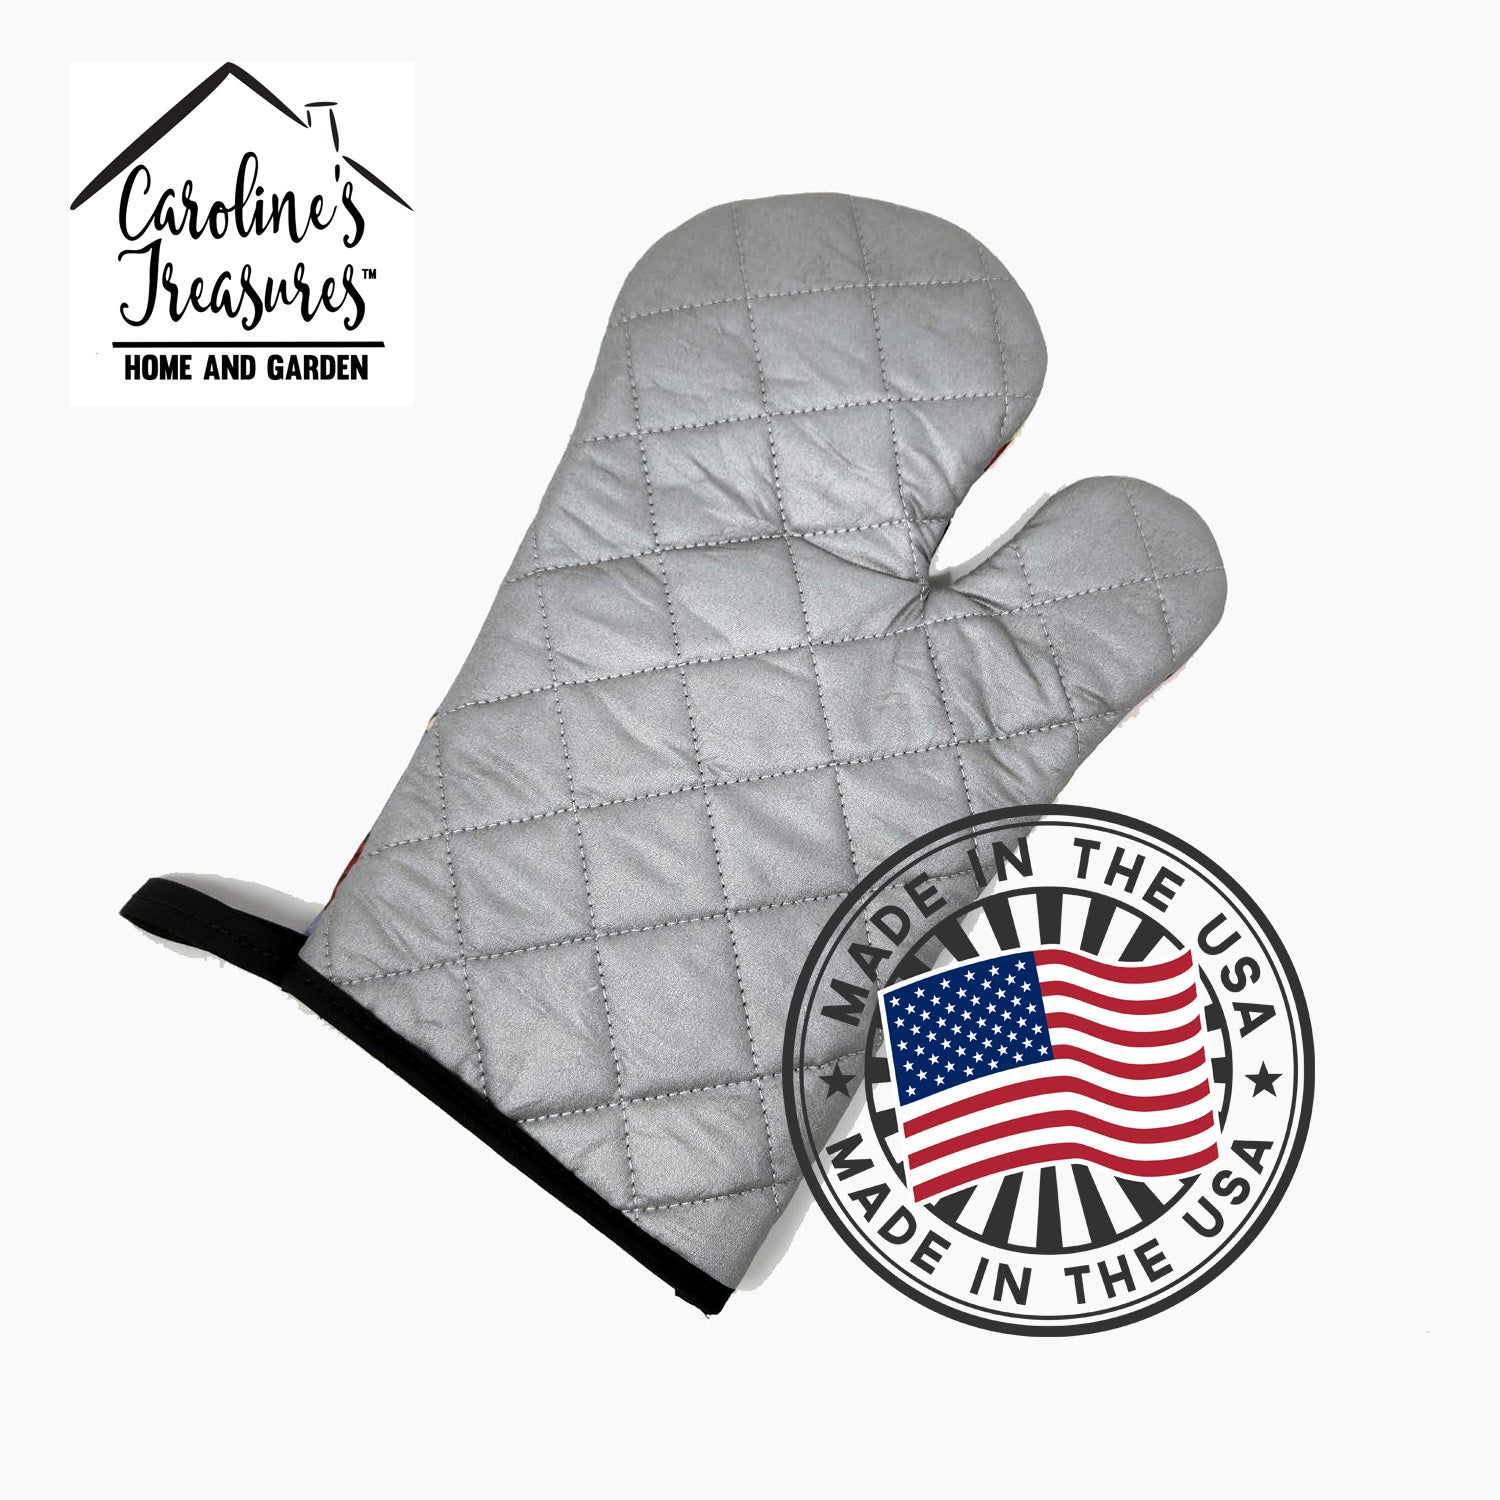 Sable Shelties Double Trouble Oven Mitt 7086OVMT  the-store.com.